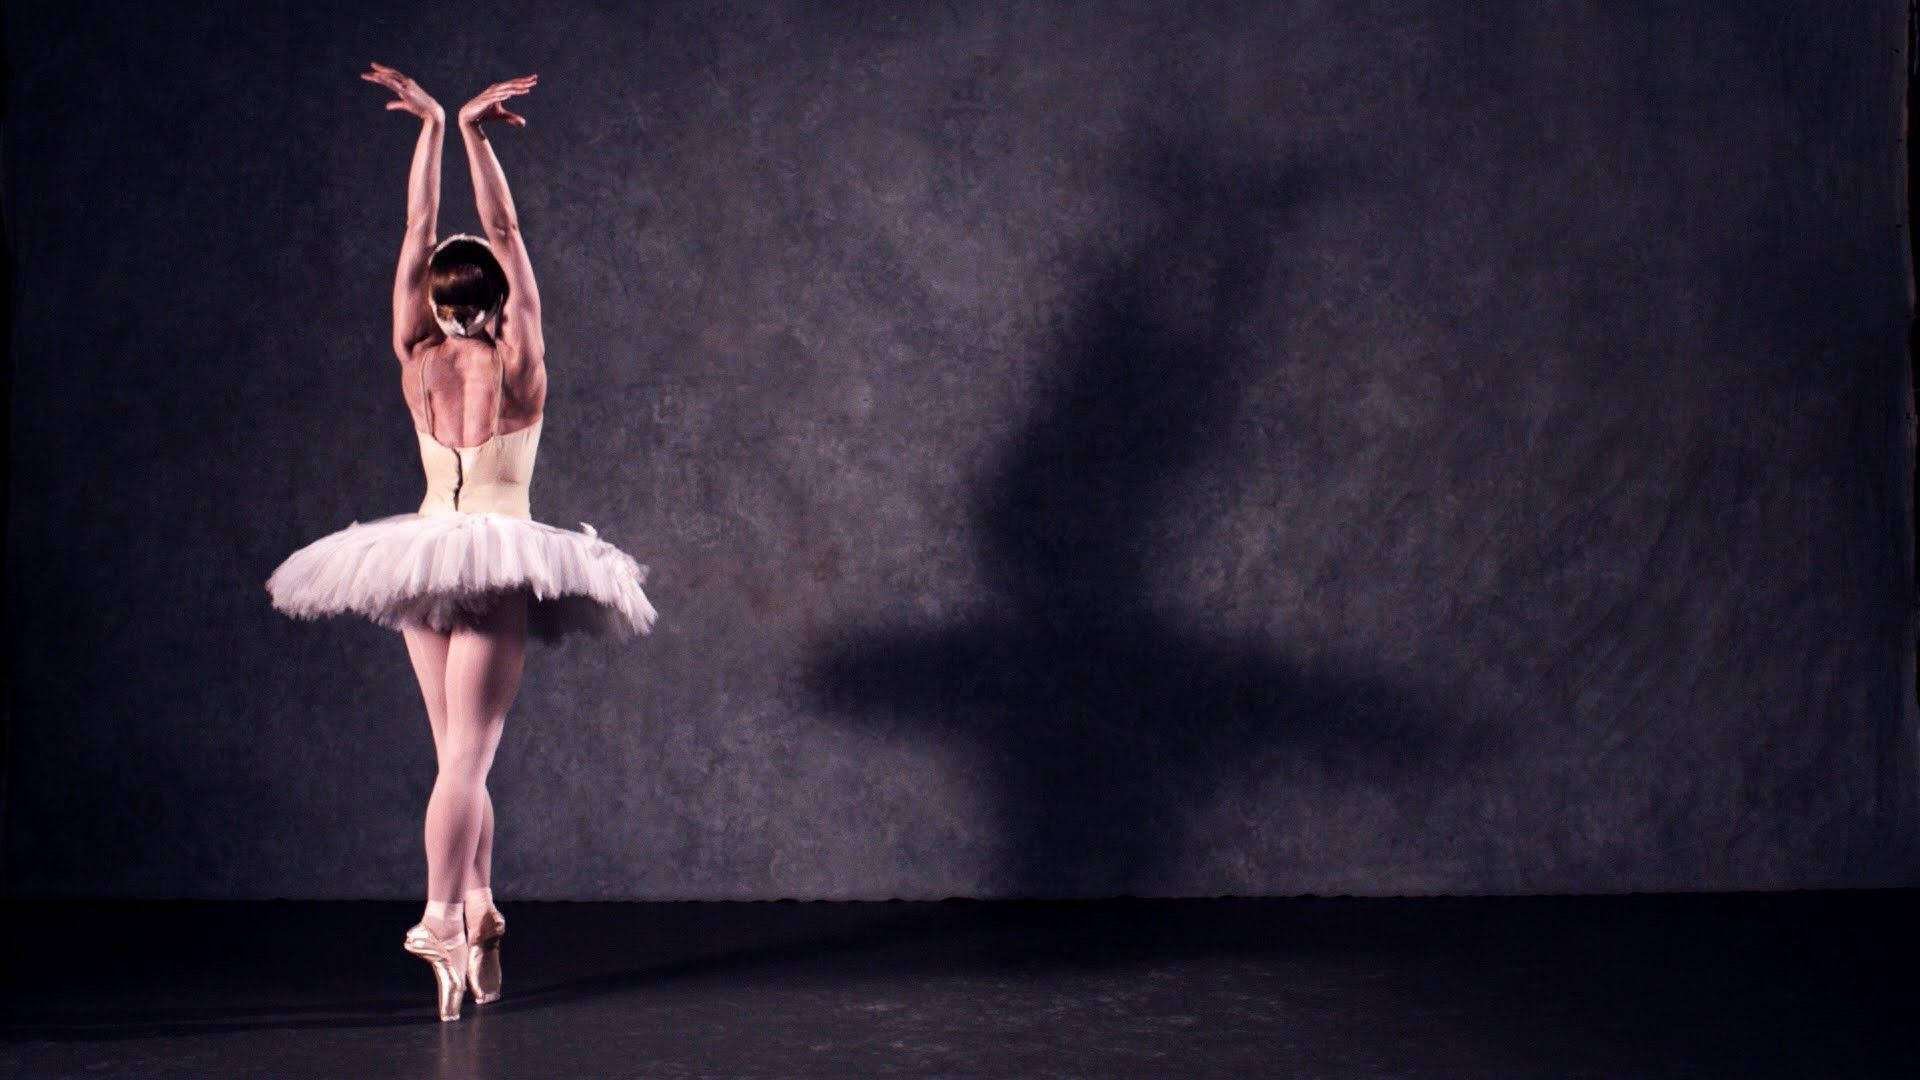 Free: Ballerina posing side ways in leotard and pointe shoes Free Photo -  nohat.cc